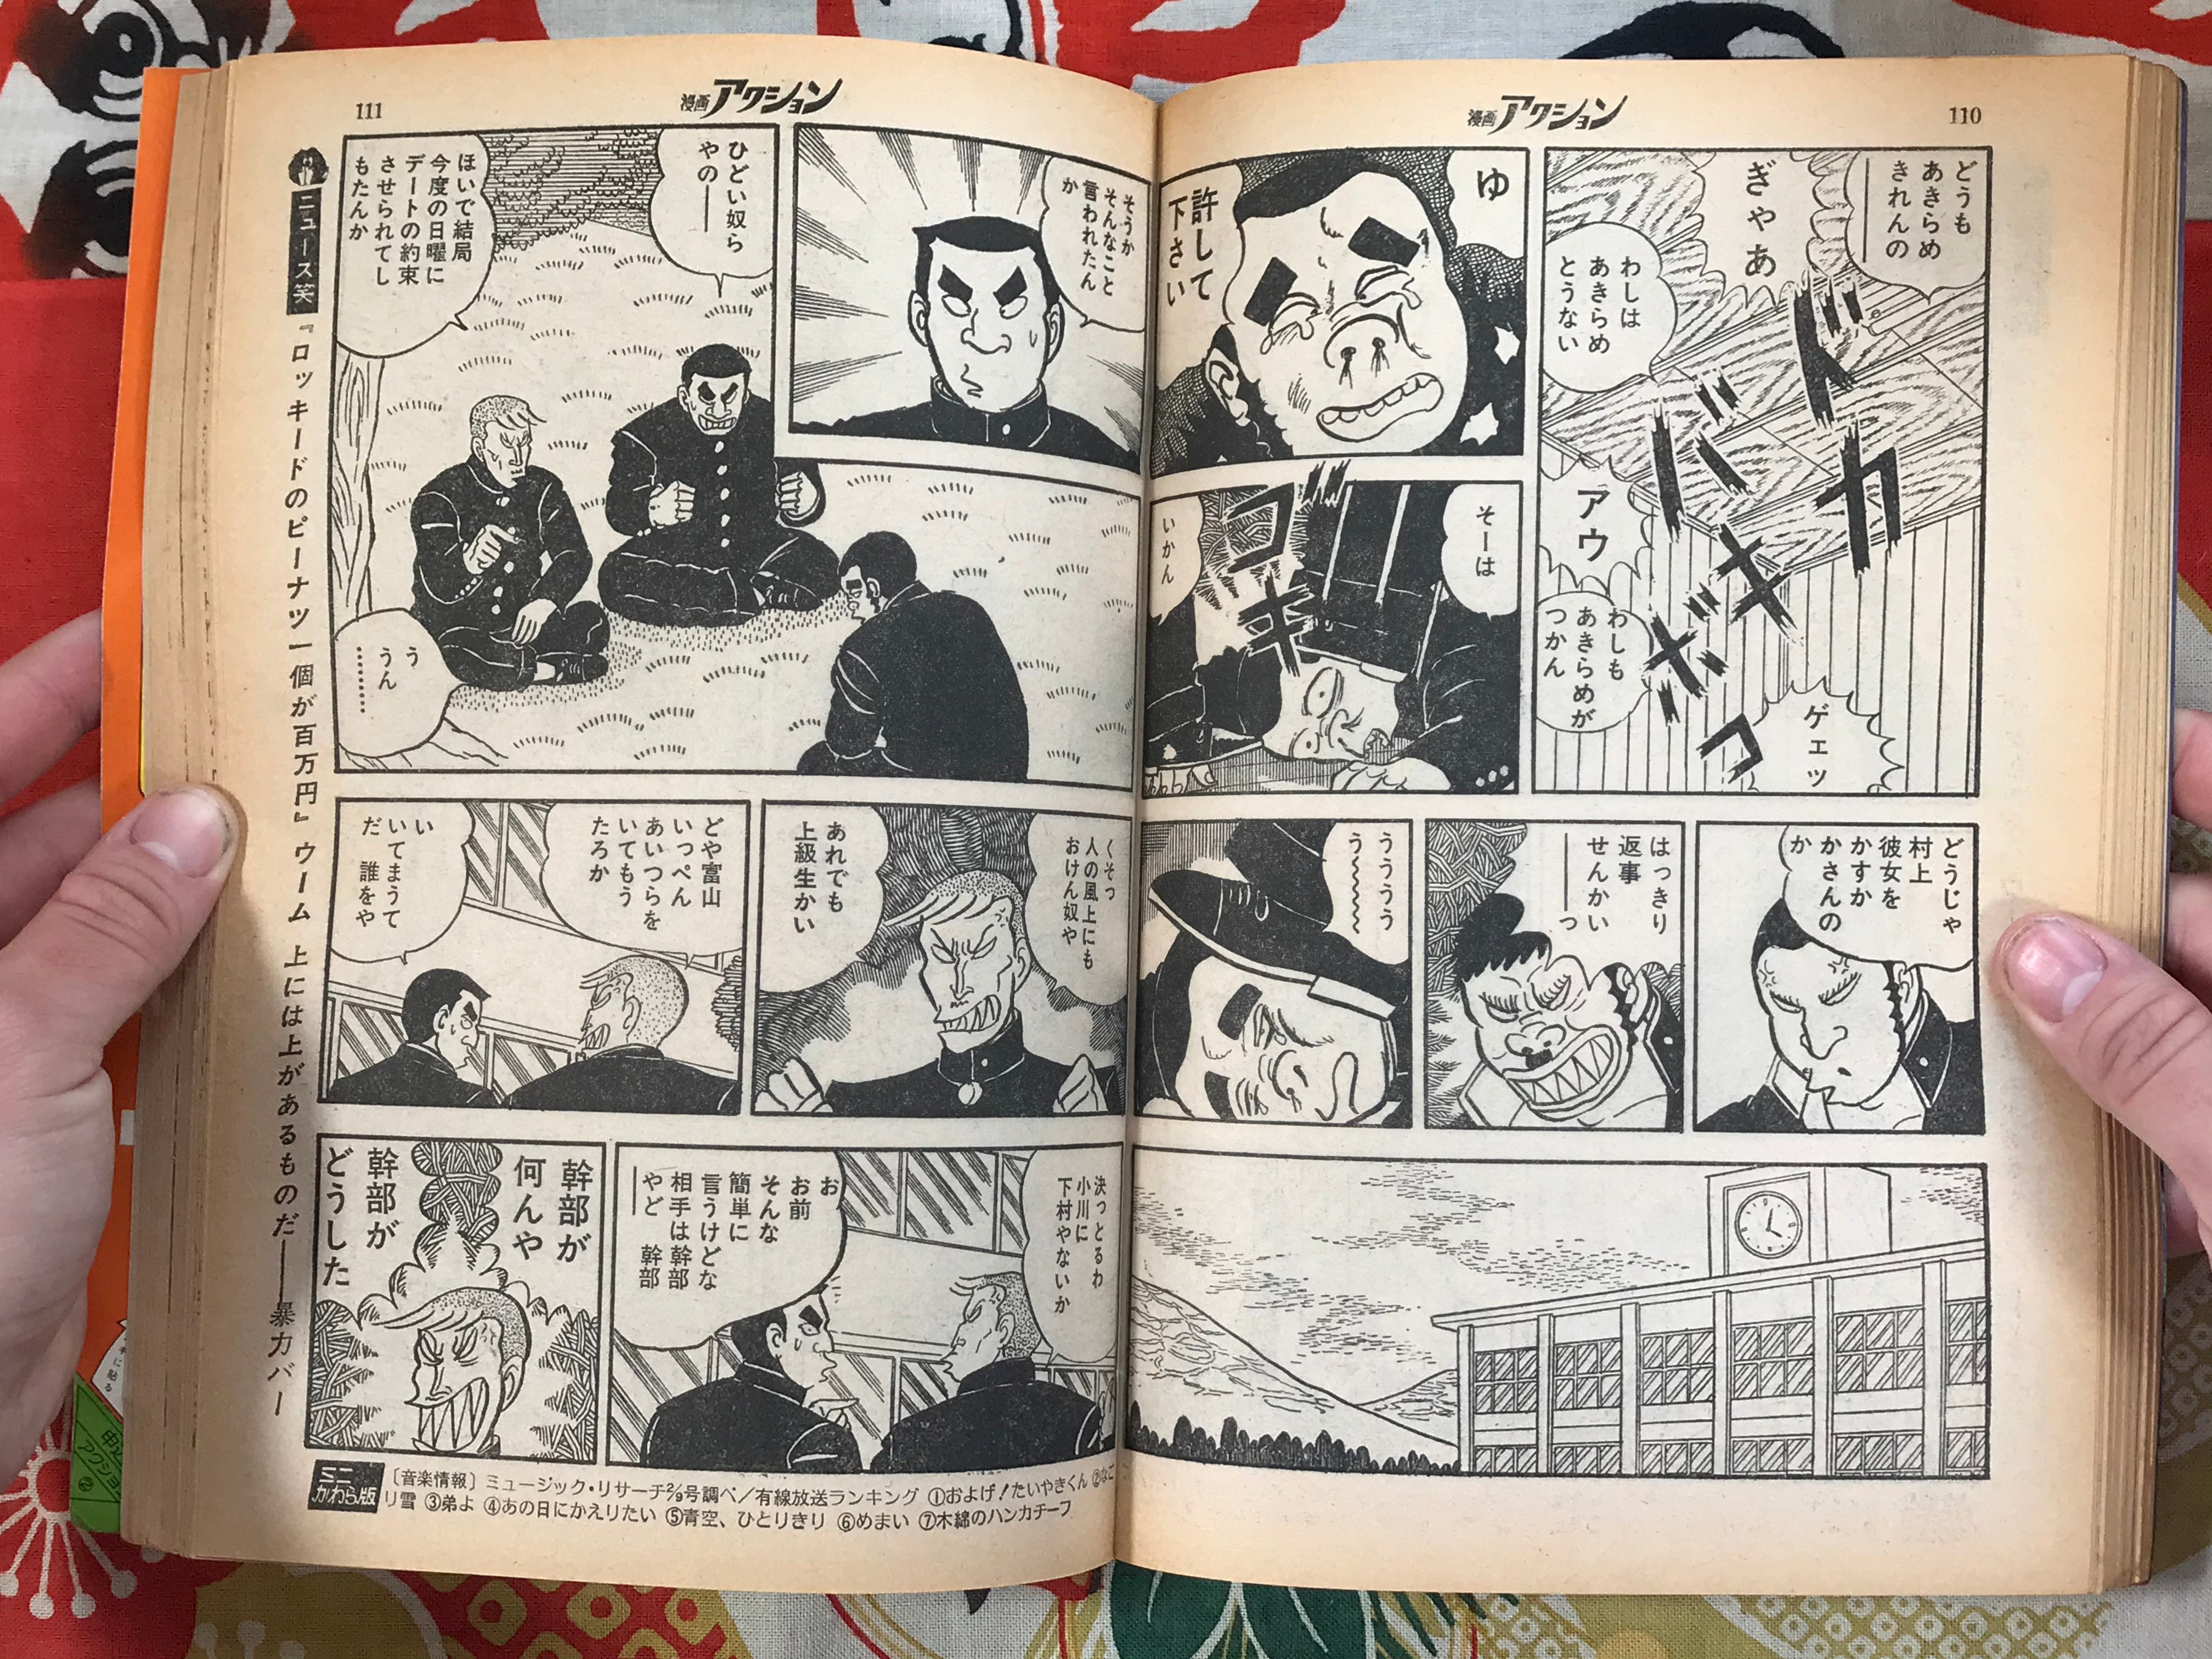 Weekly Manga Action featuring Lone Wolf and Cub, Kazuo Kamimura, etc (1976 March 4)